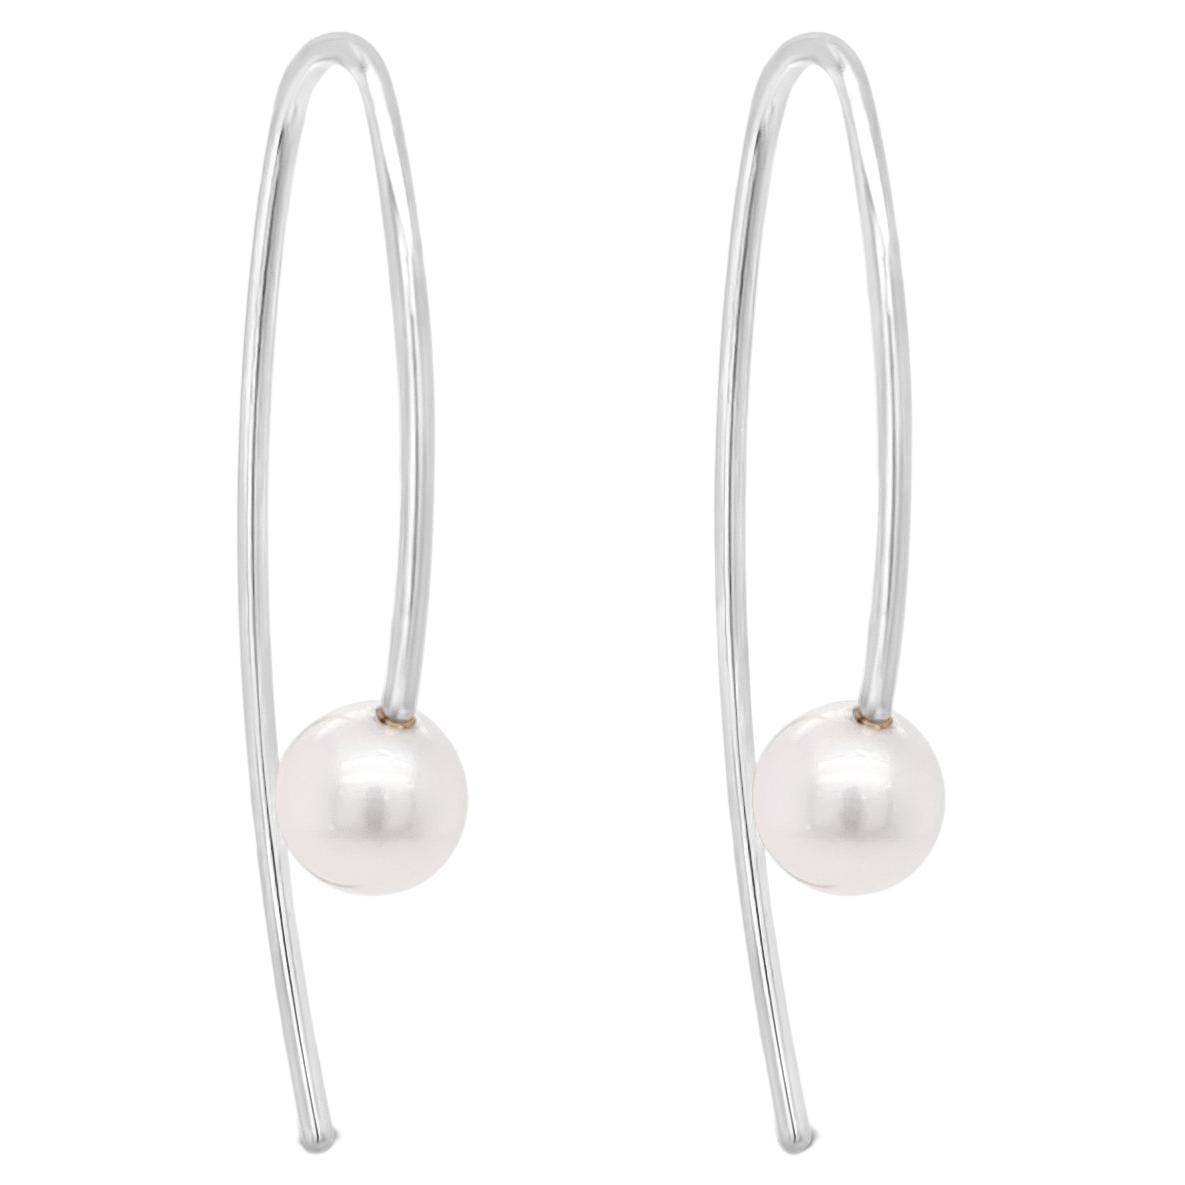 18ct White Gold and Pearl Earrings "Lili"